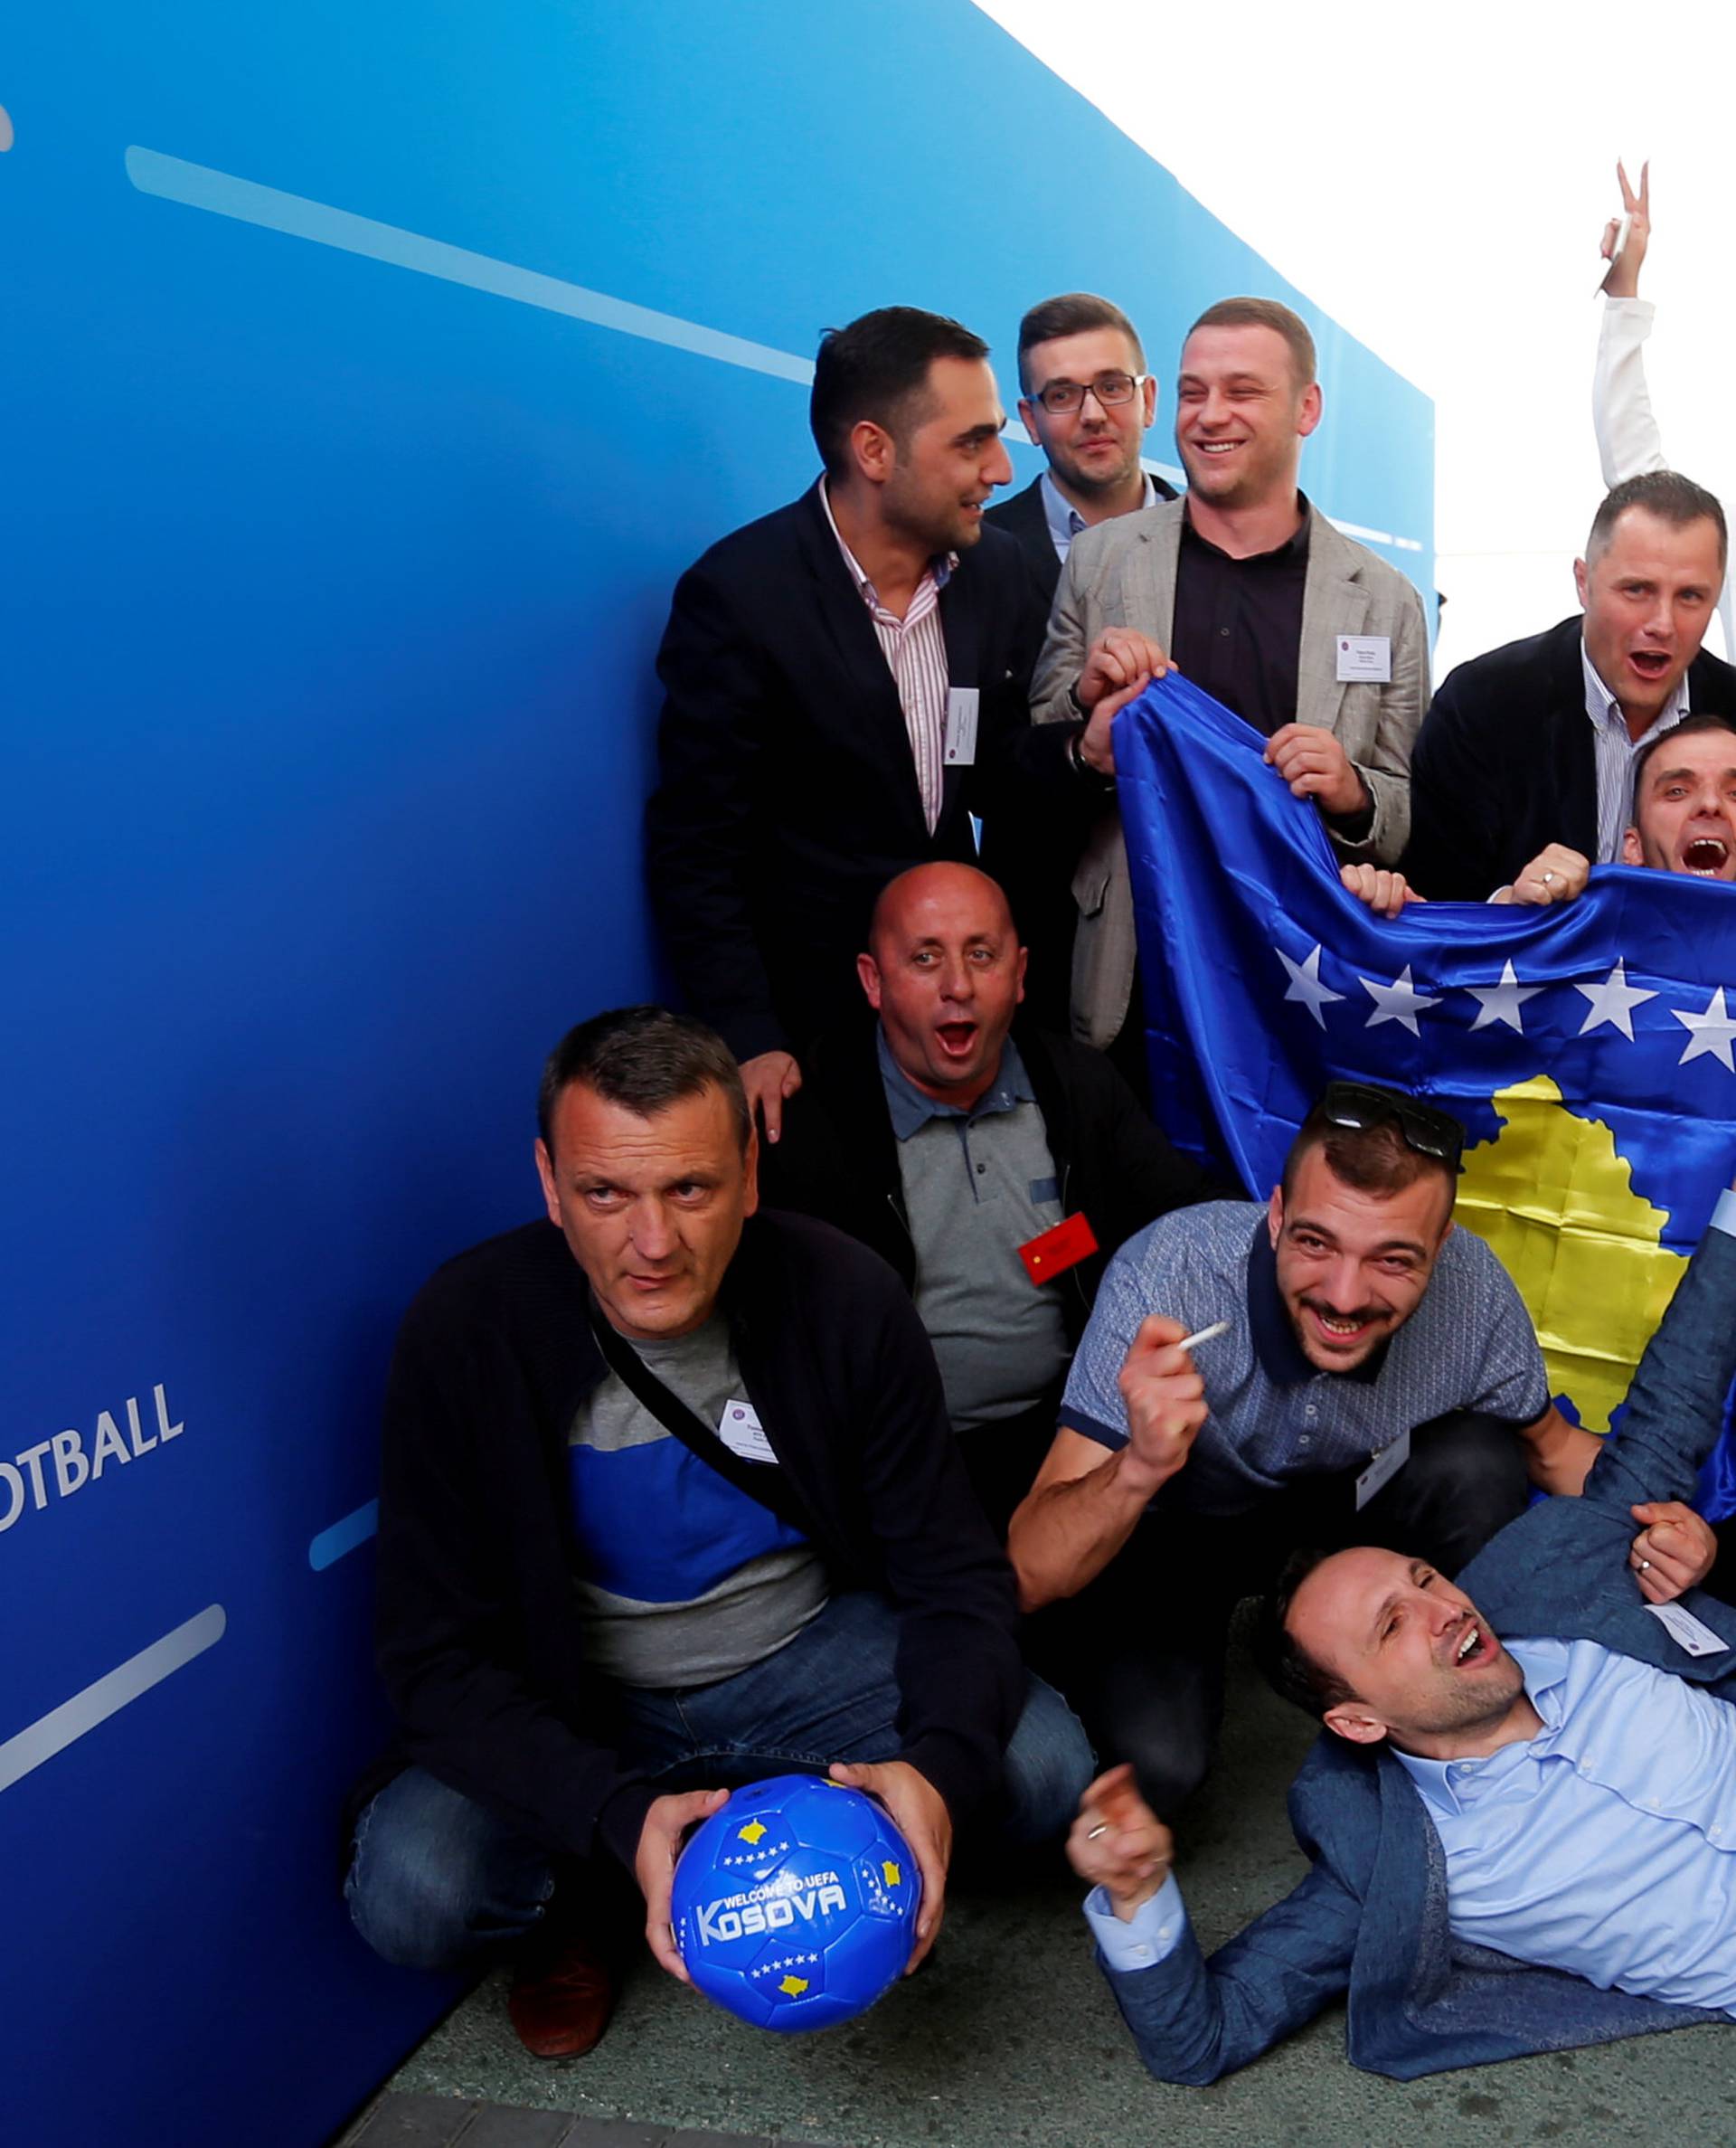 Members of the Kosovo media team celebrate outside the convention centre where the European football group UEFA admitted Kosovo as its newest member in Budapest